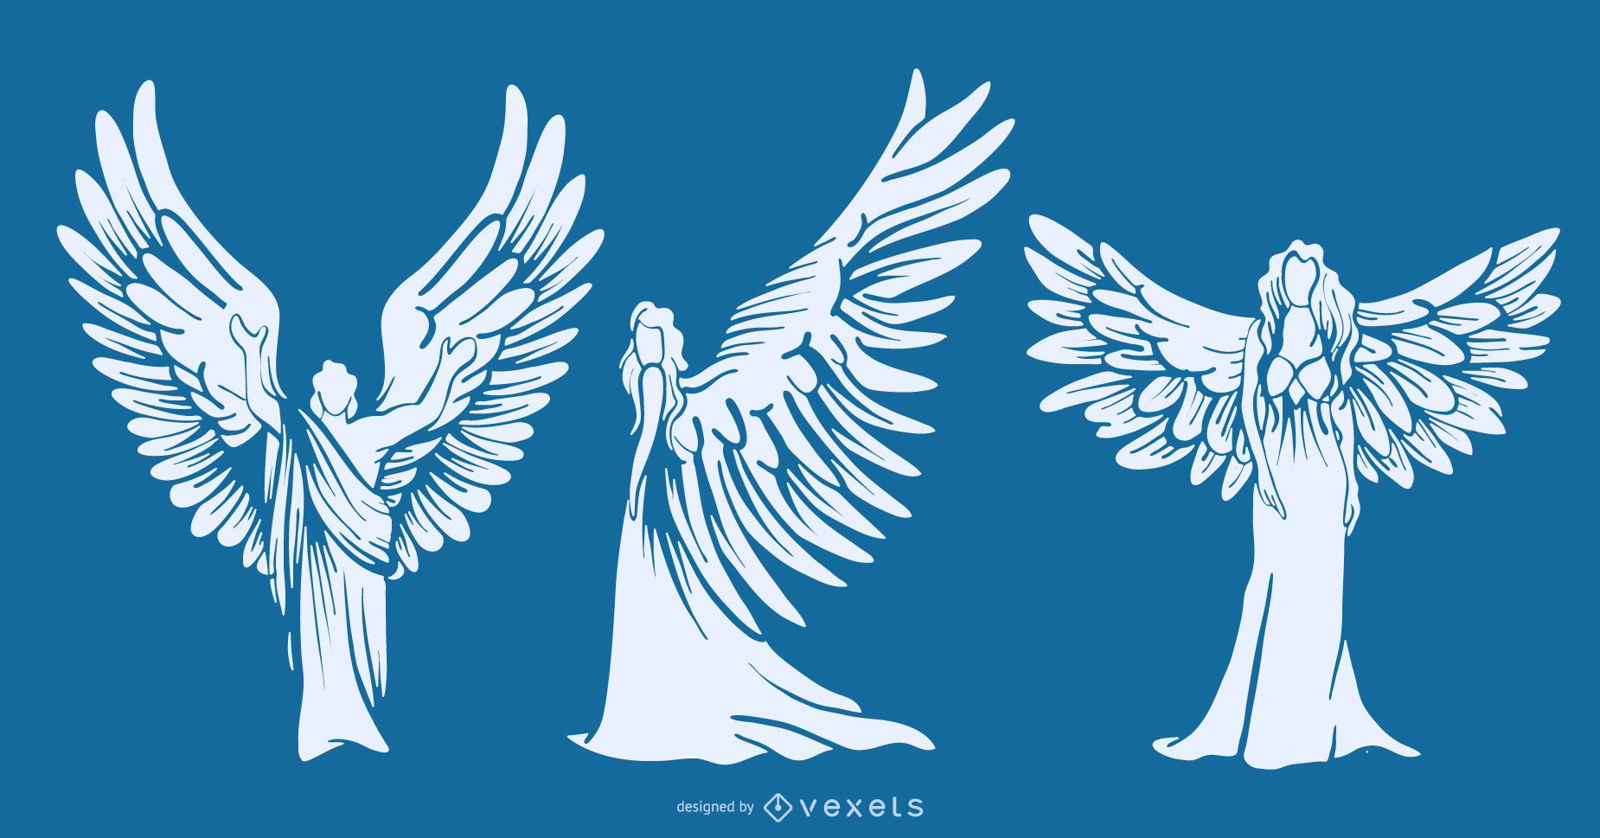 Winged angels silhouettes set